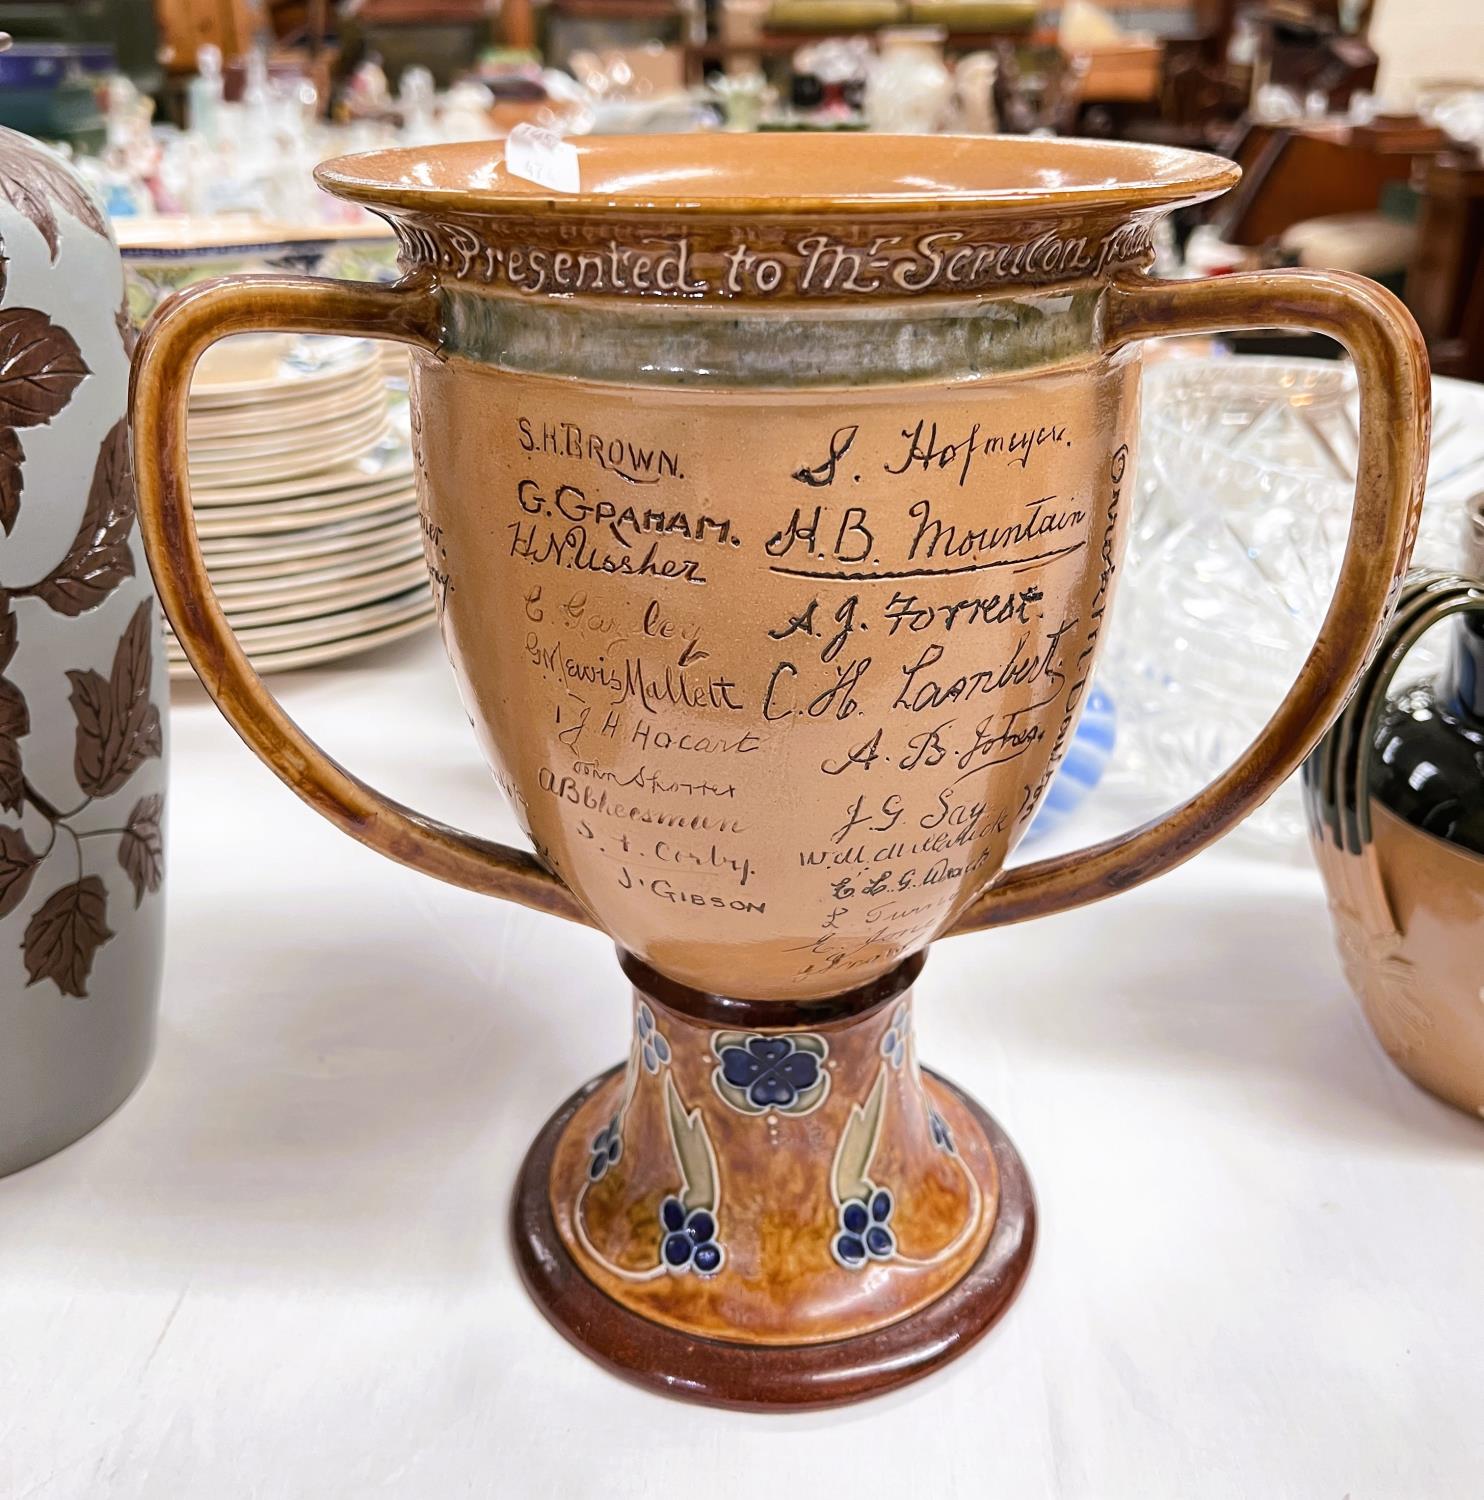 An unusual Royal Doulton stoneware "Tigg" with dedication to "Mr Scruton" and signatures of all